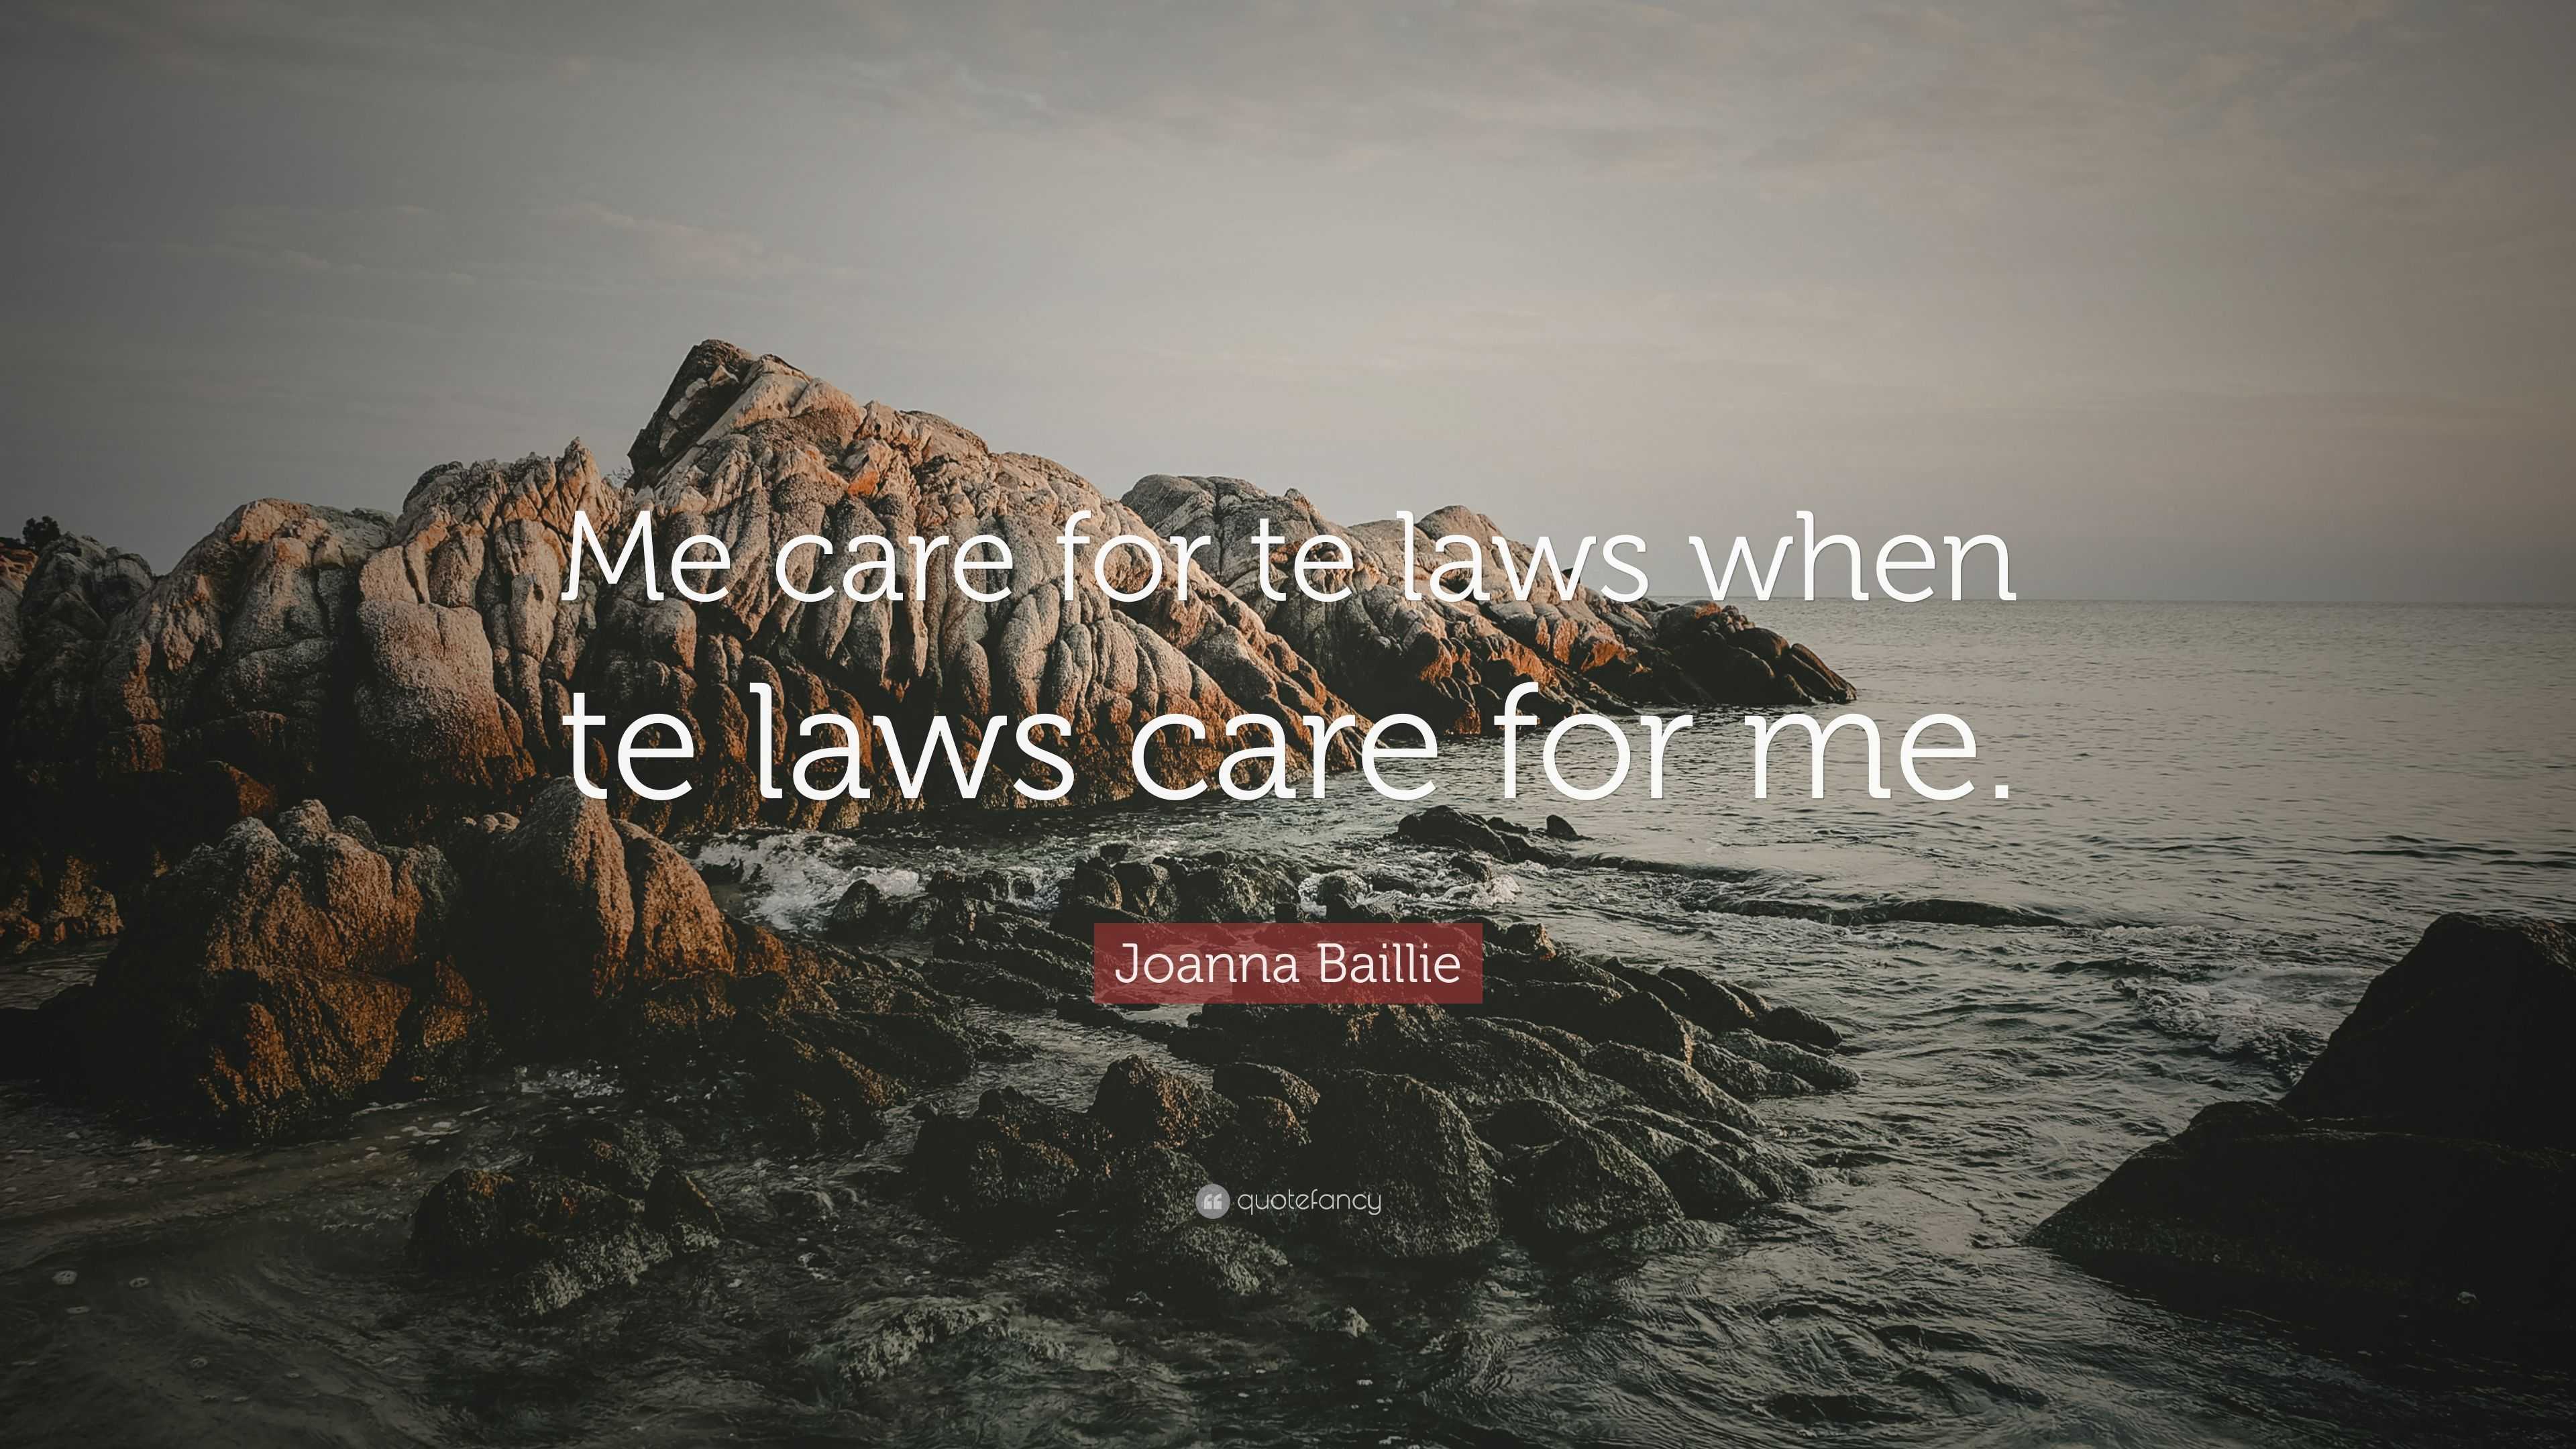 Joanna Baillie Quote: “Me care for te